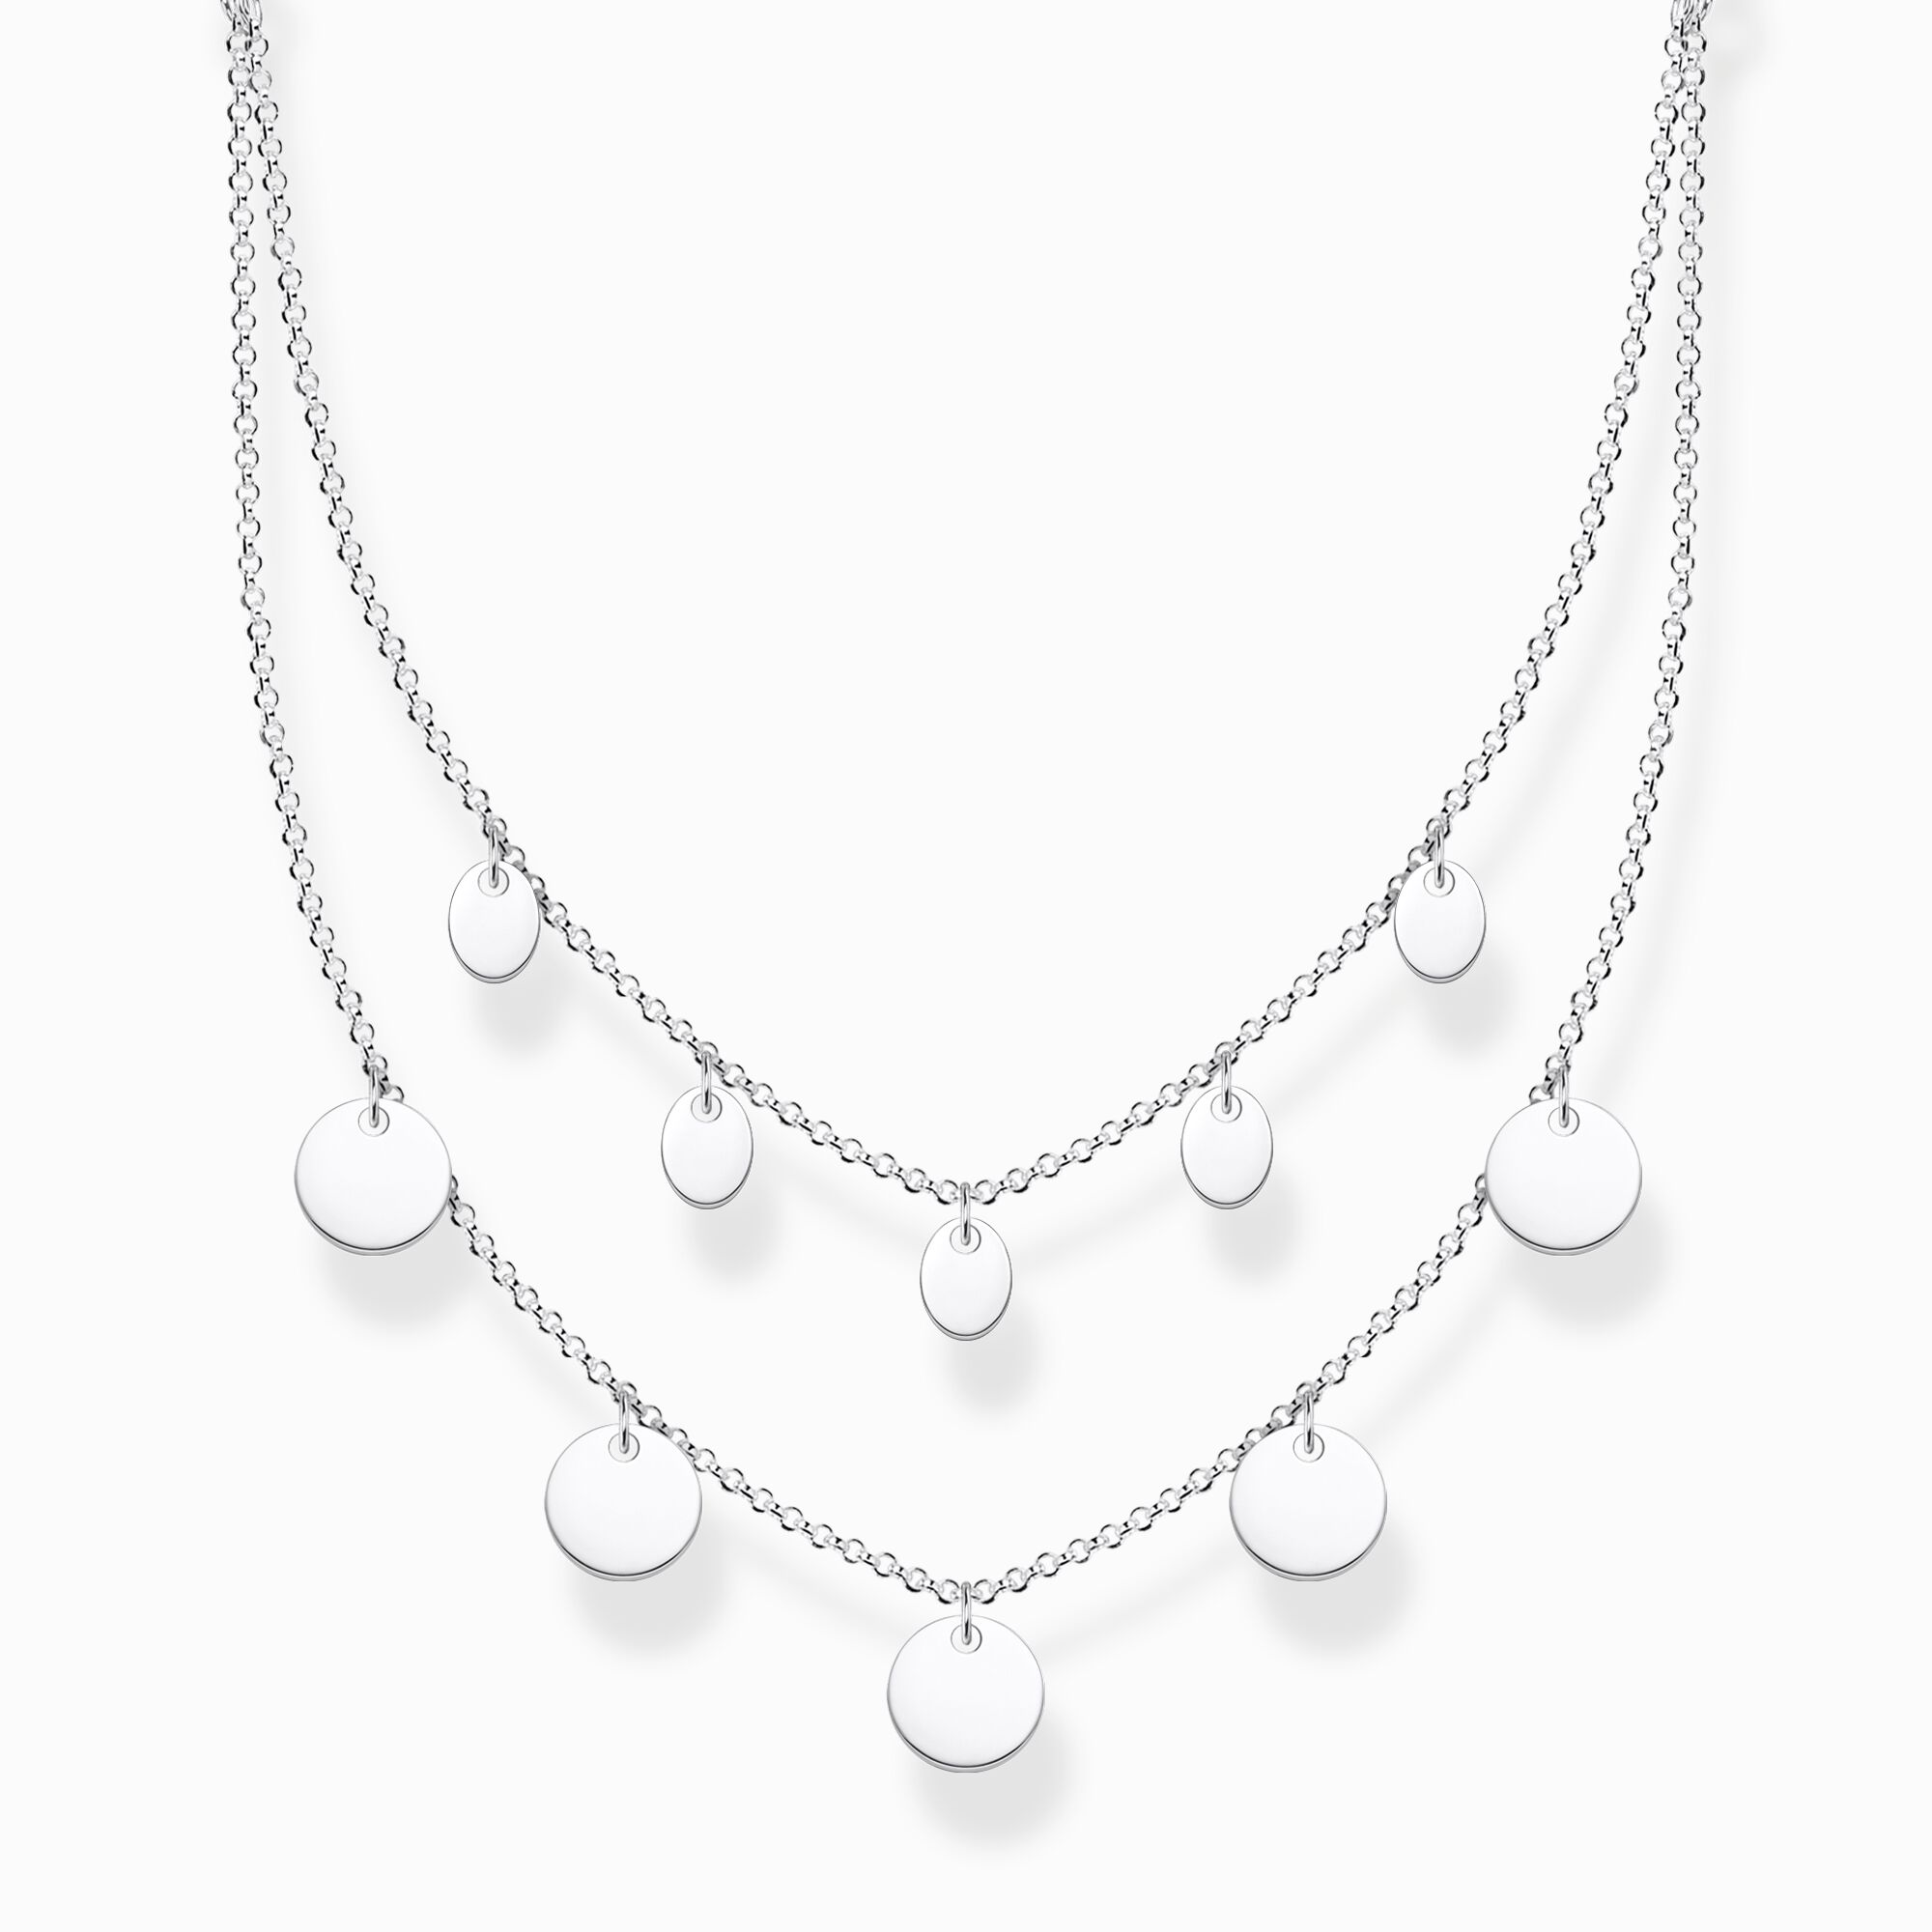 Necklace with discs silver from the Charming Collection collection in the THOMAS SABO online store